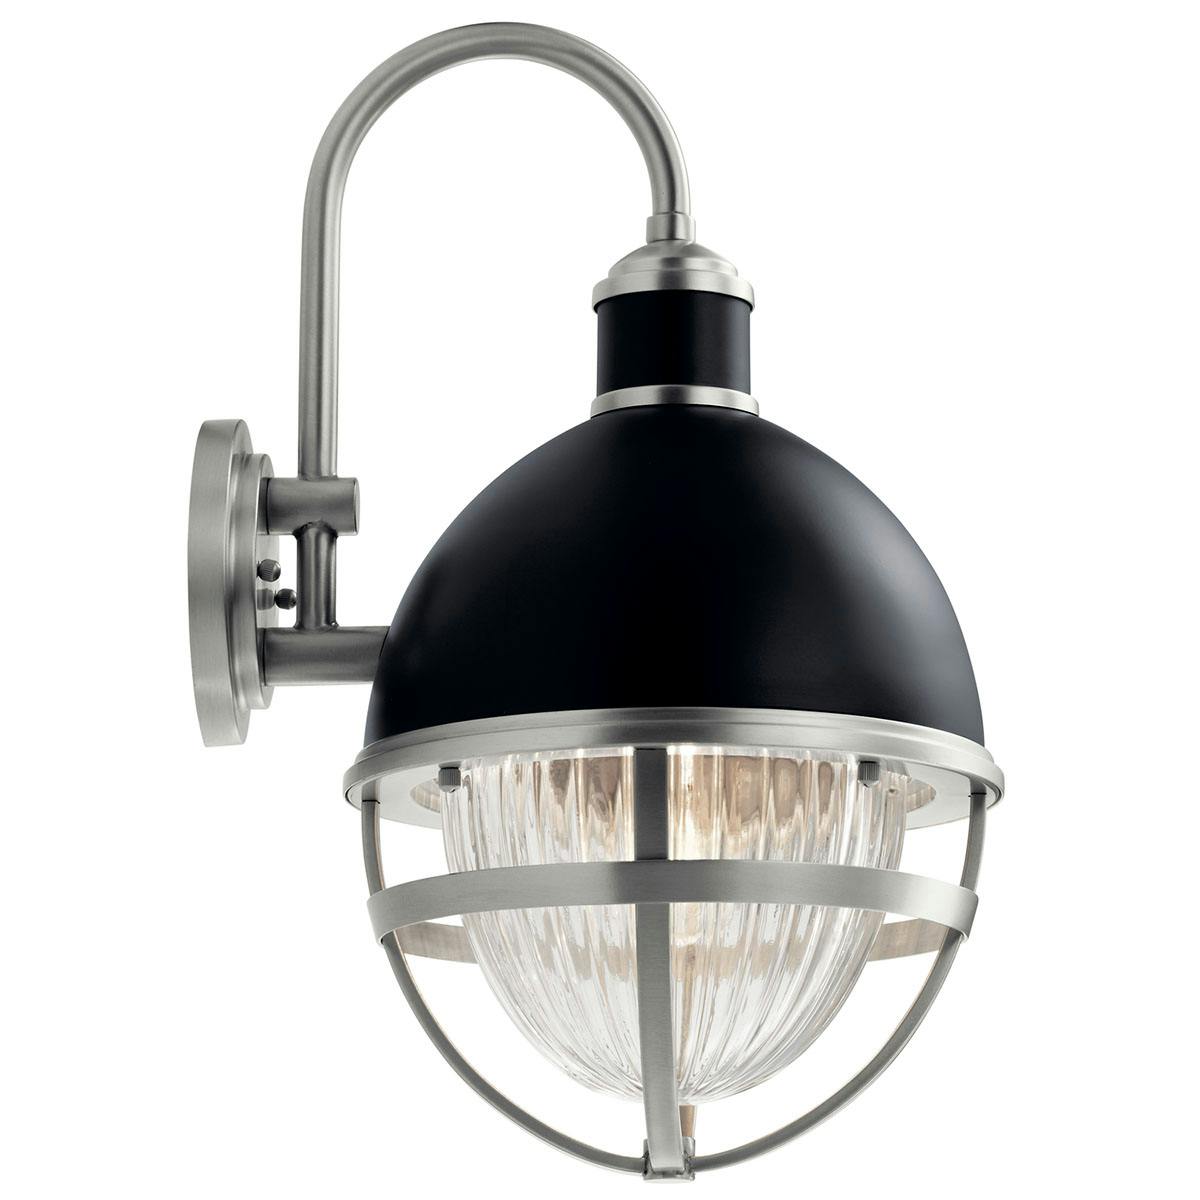 Profile view of the Tollis 18.50" Wall Light Black and Nickel on a white background